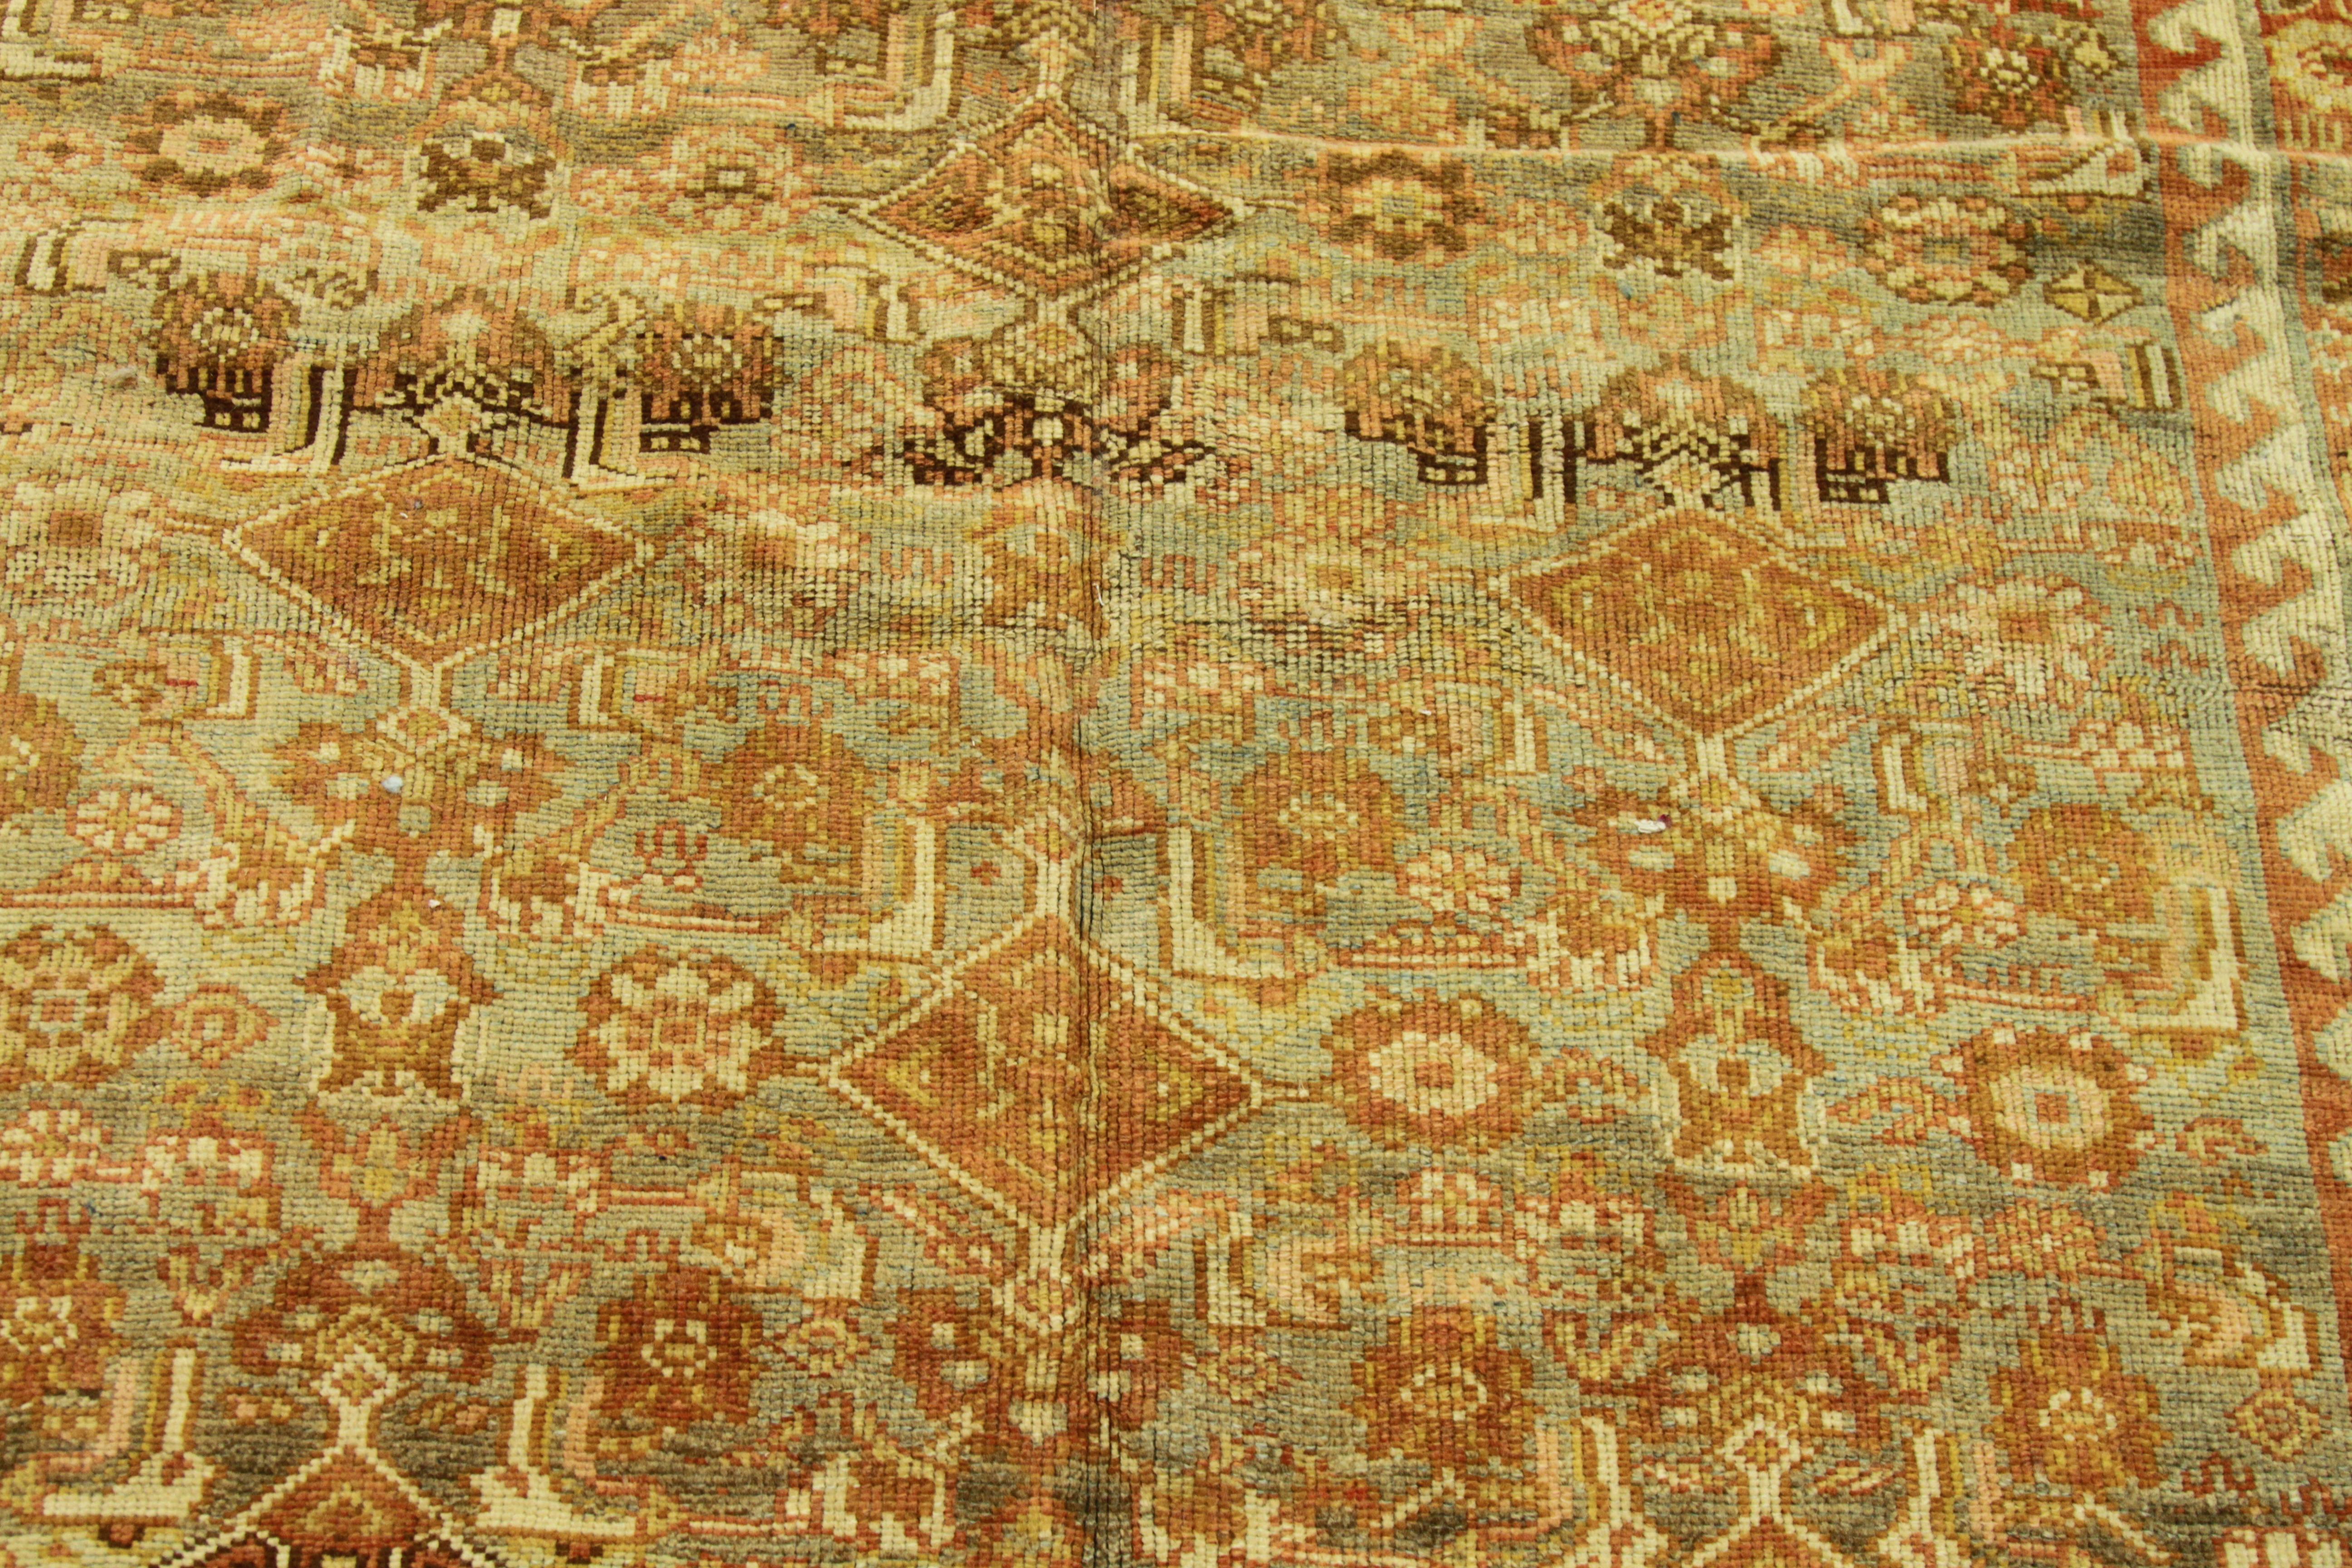 Antique Persian Rug Bijar Style with Traditional Floral Patterns, circa 1930s For Sale 3